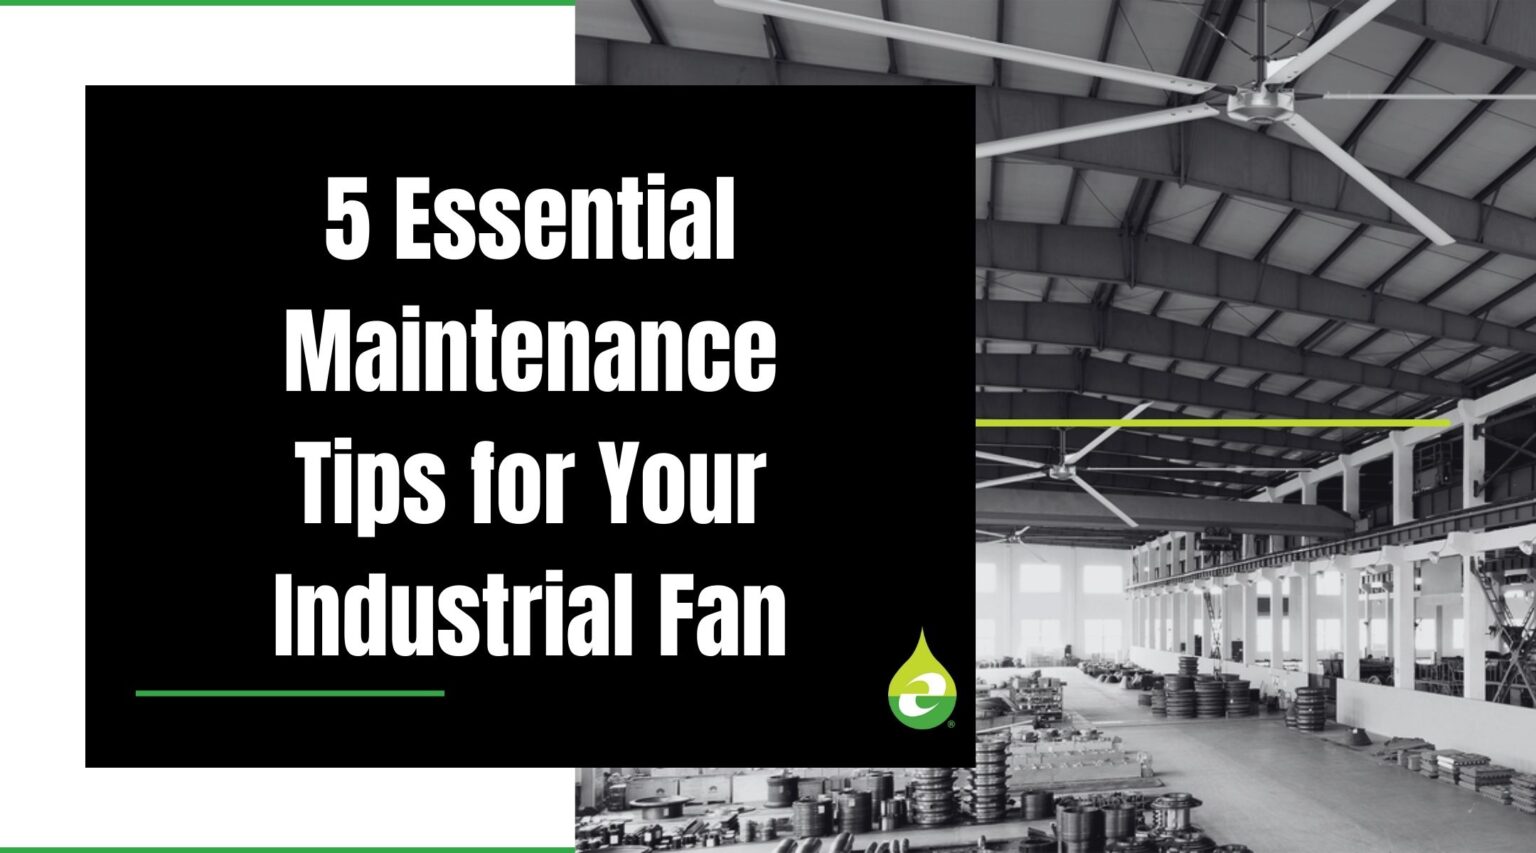 5 Essential Maintenance Tips for Your Industrial Fan